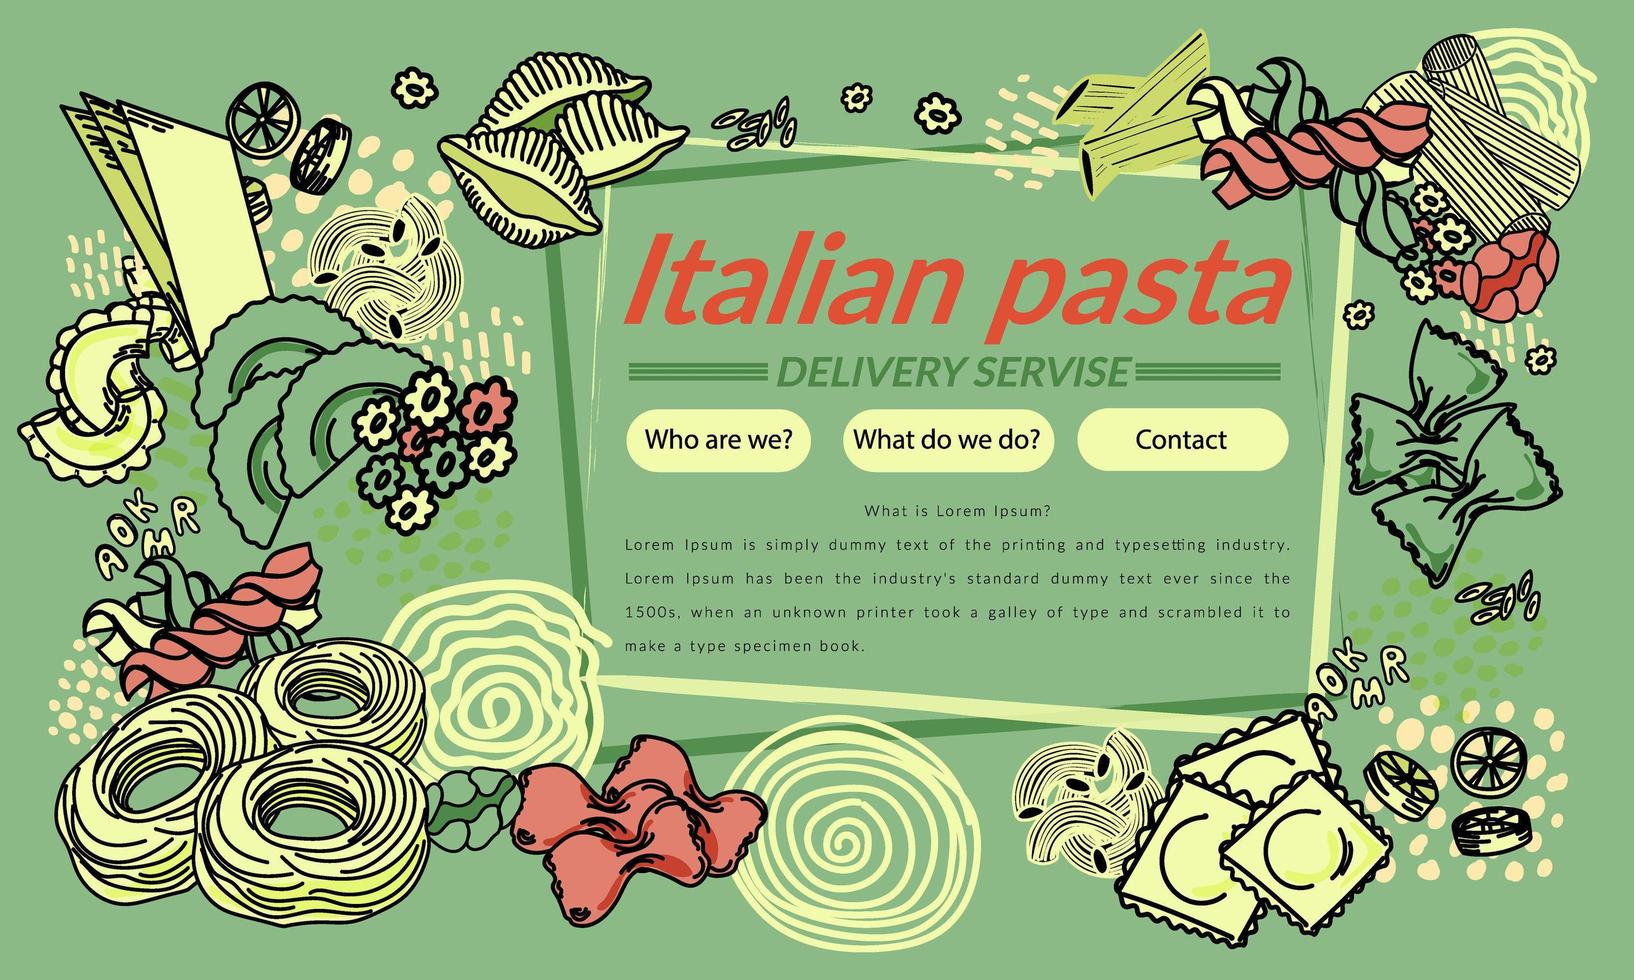 Italian pasta in a frame. Hand-drawn vector illustration in doodle style. Italian pasta products. Food service design template, website, flyer. Illustration of farfalle, penne and spaghetti.